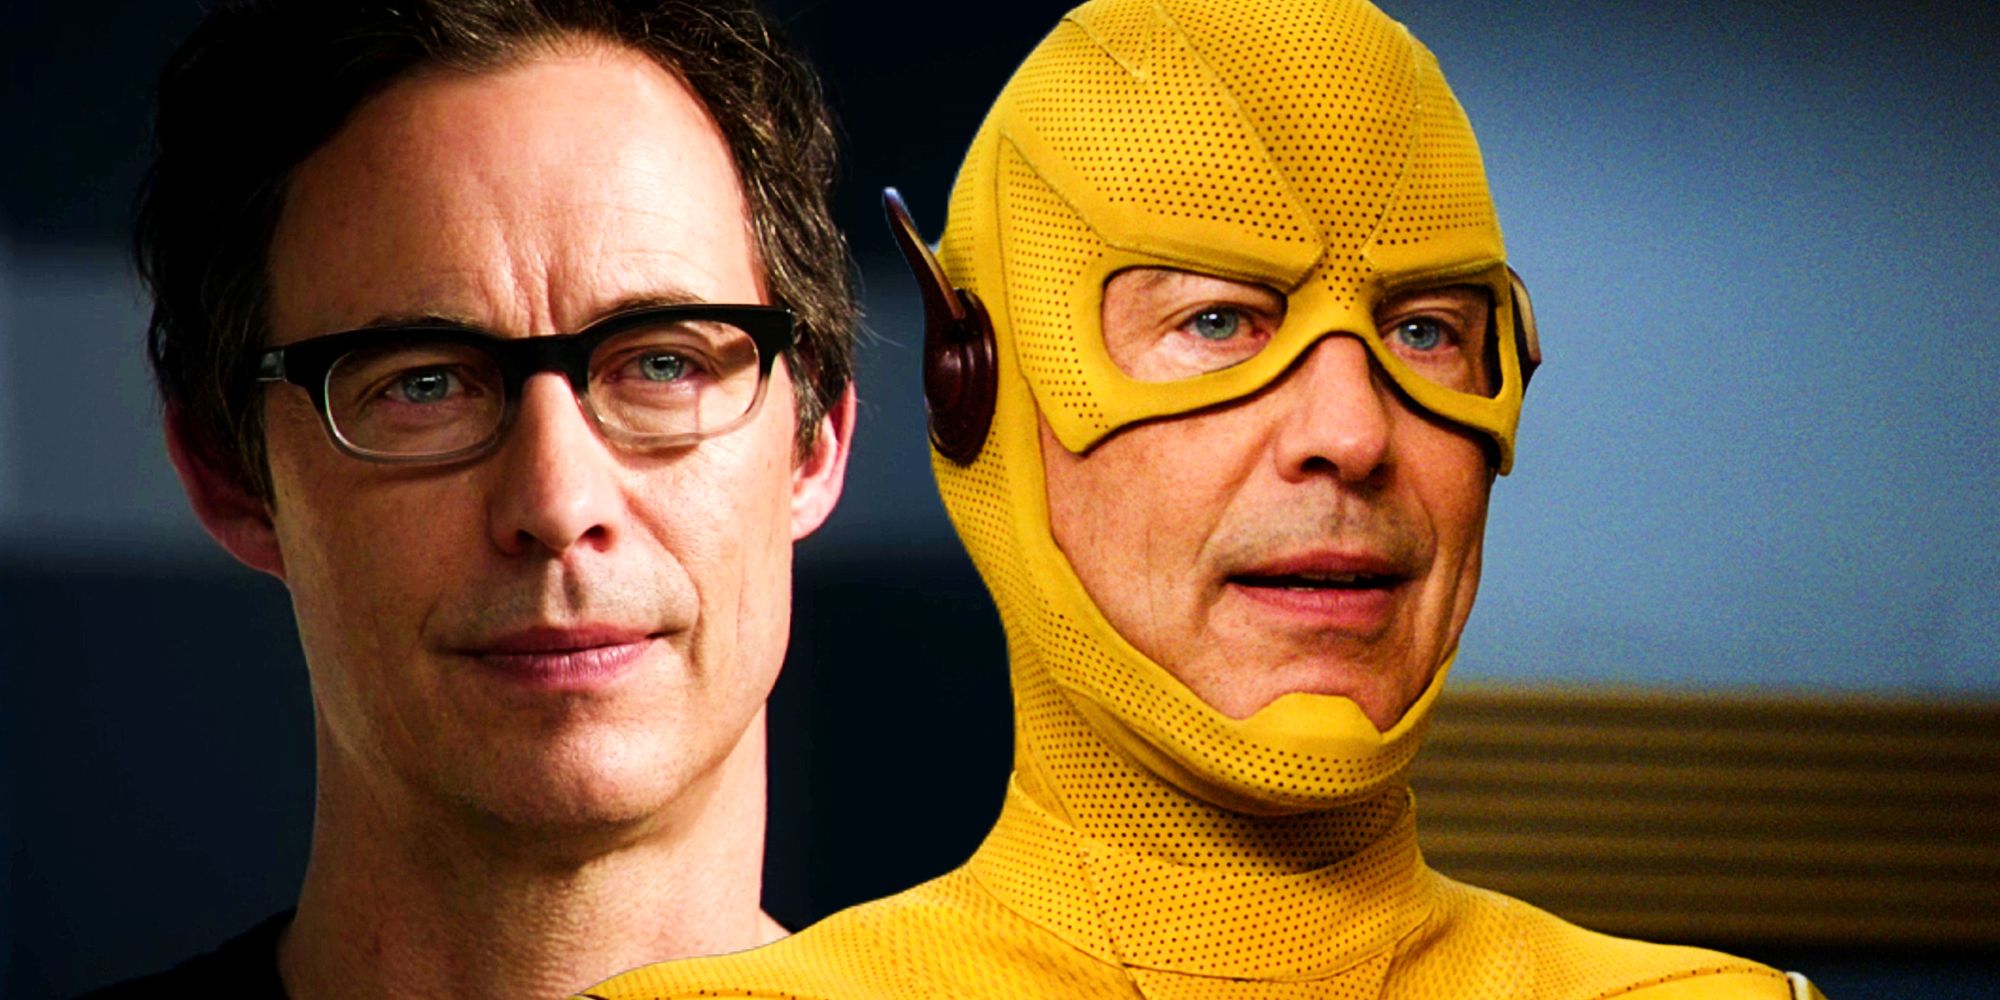 The Flash Season 1's Perfect Reverse Flash Doomed The Show To Failure